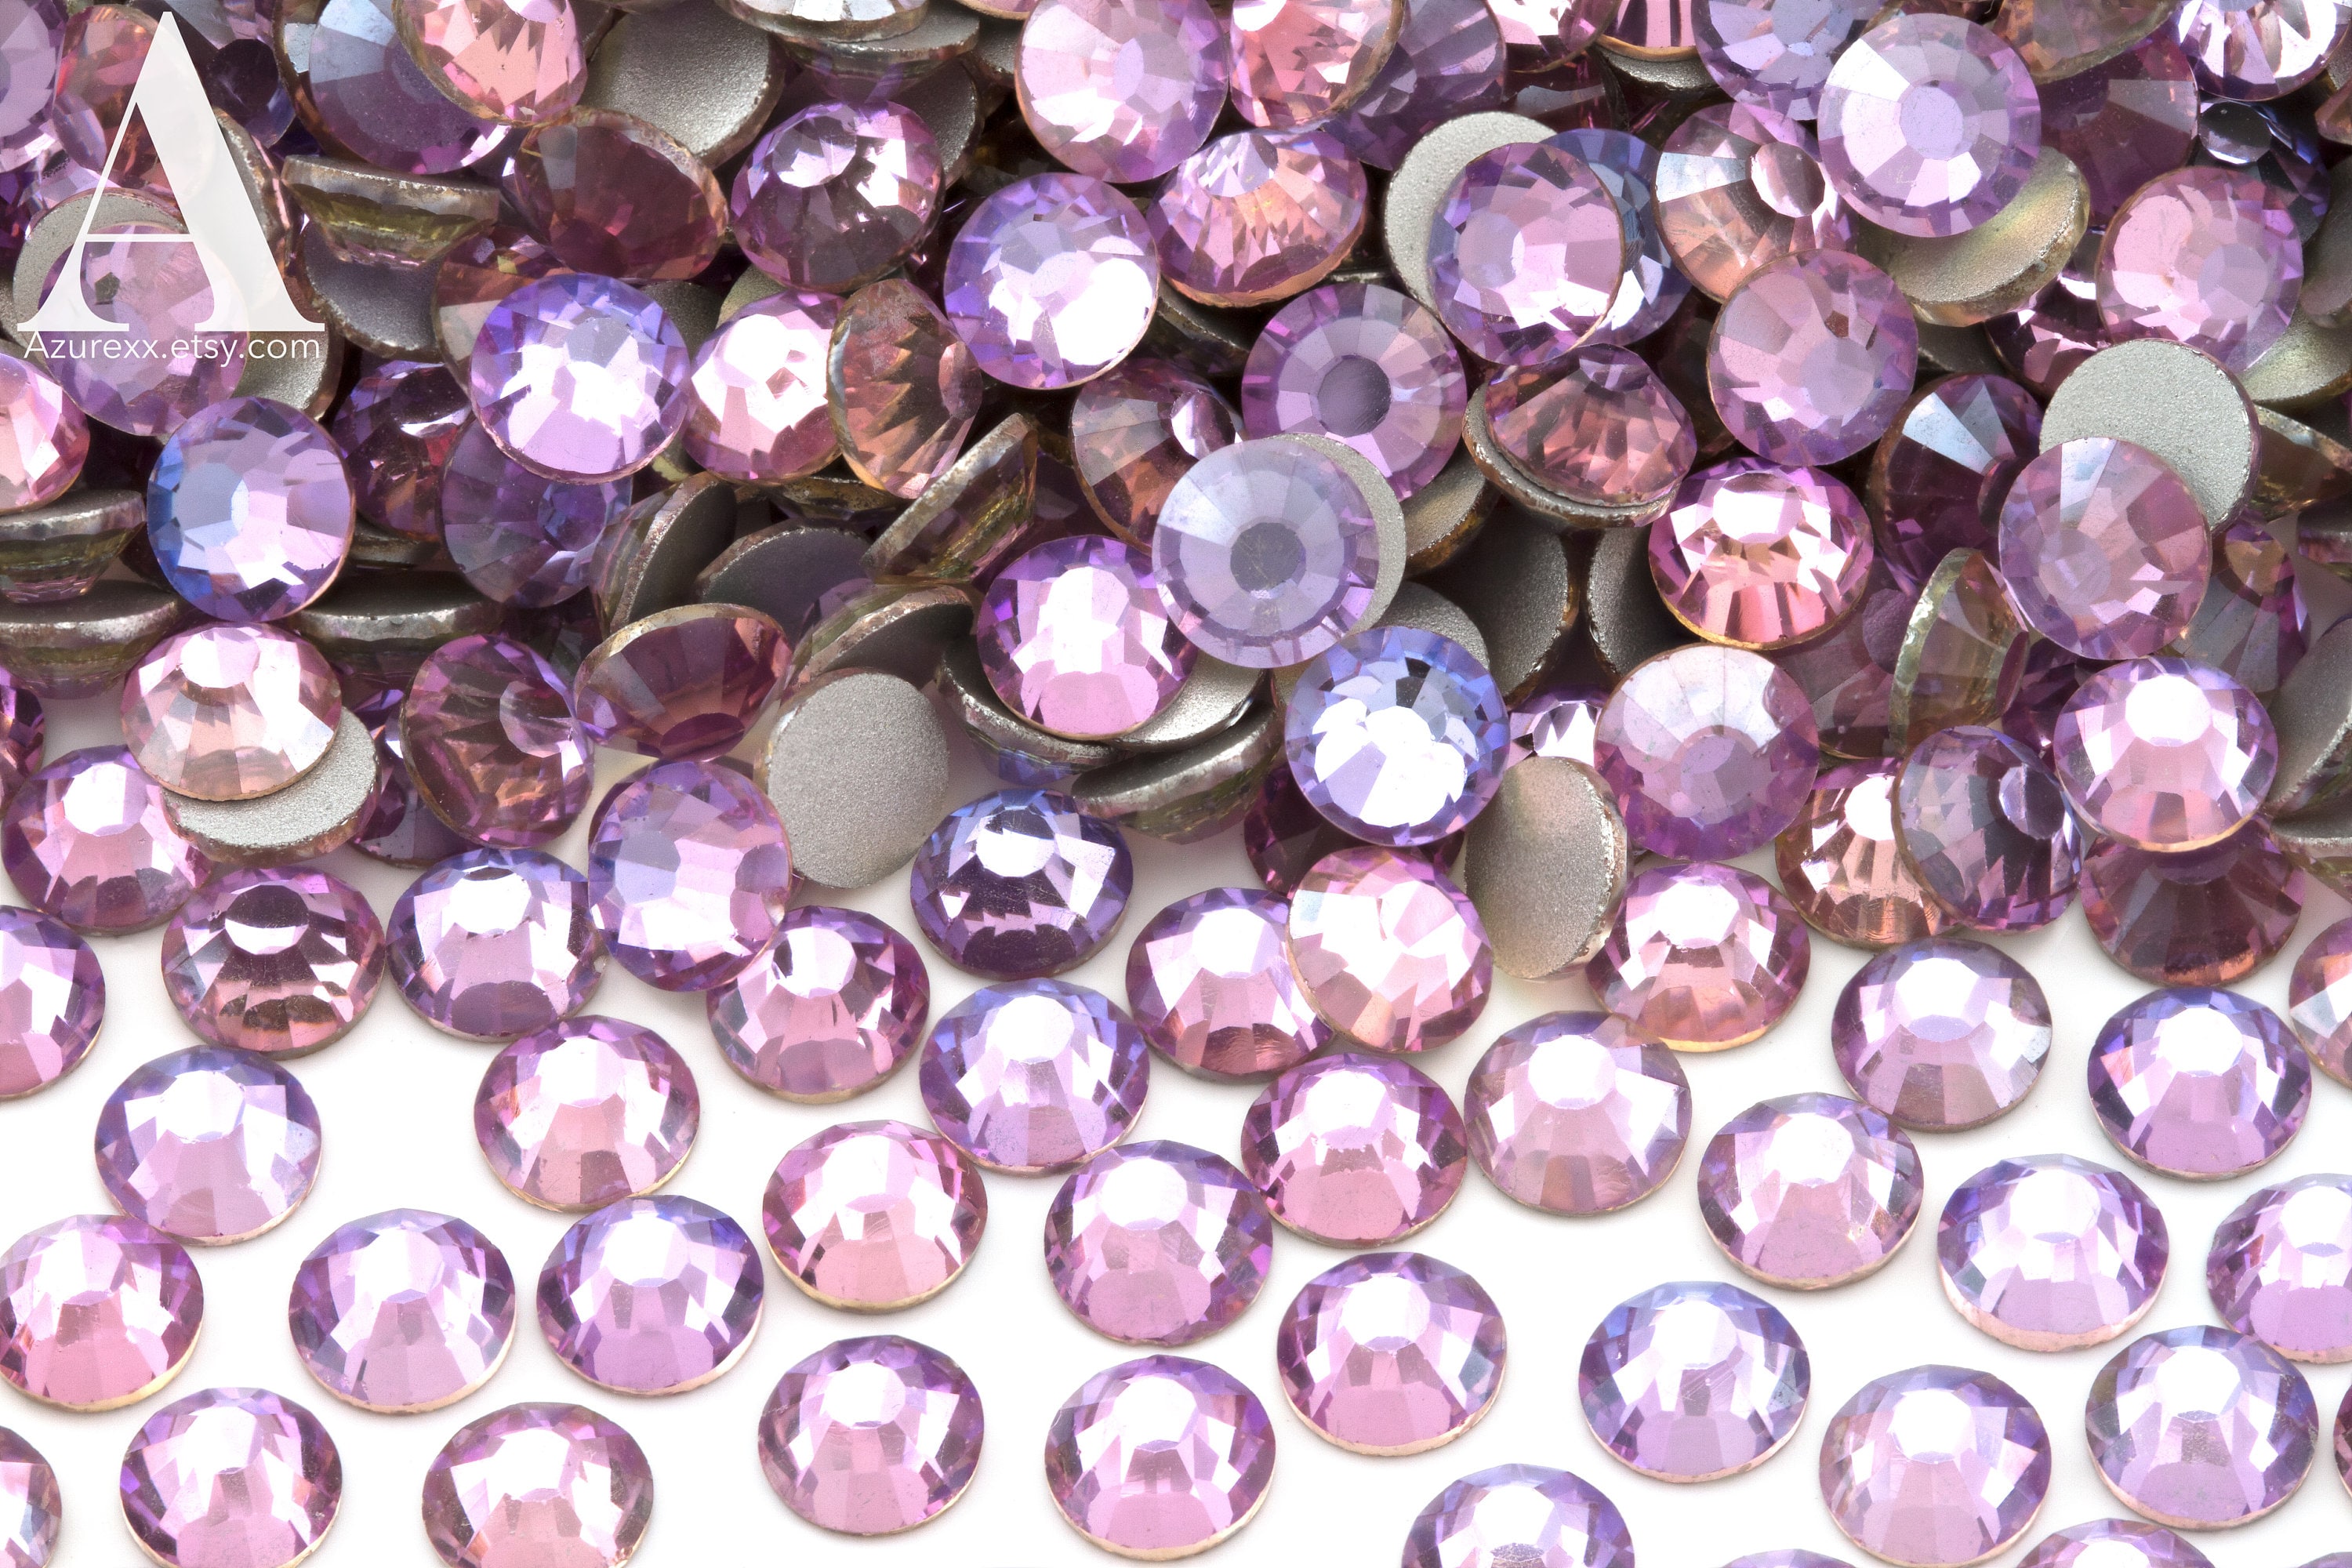 Purple Velvet HOTFIX PREMIUM Glass Rhinestones Bling Crystals  Embellishments for Fabric Choose Size Ss6 Ss10 Ss16 Ss20 Ss30 High Quality  